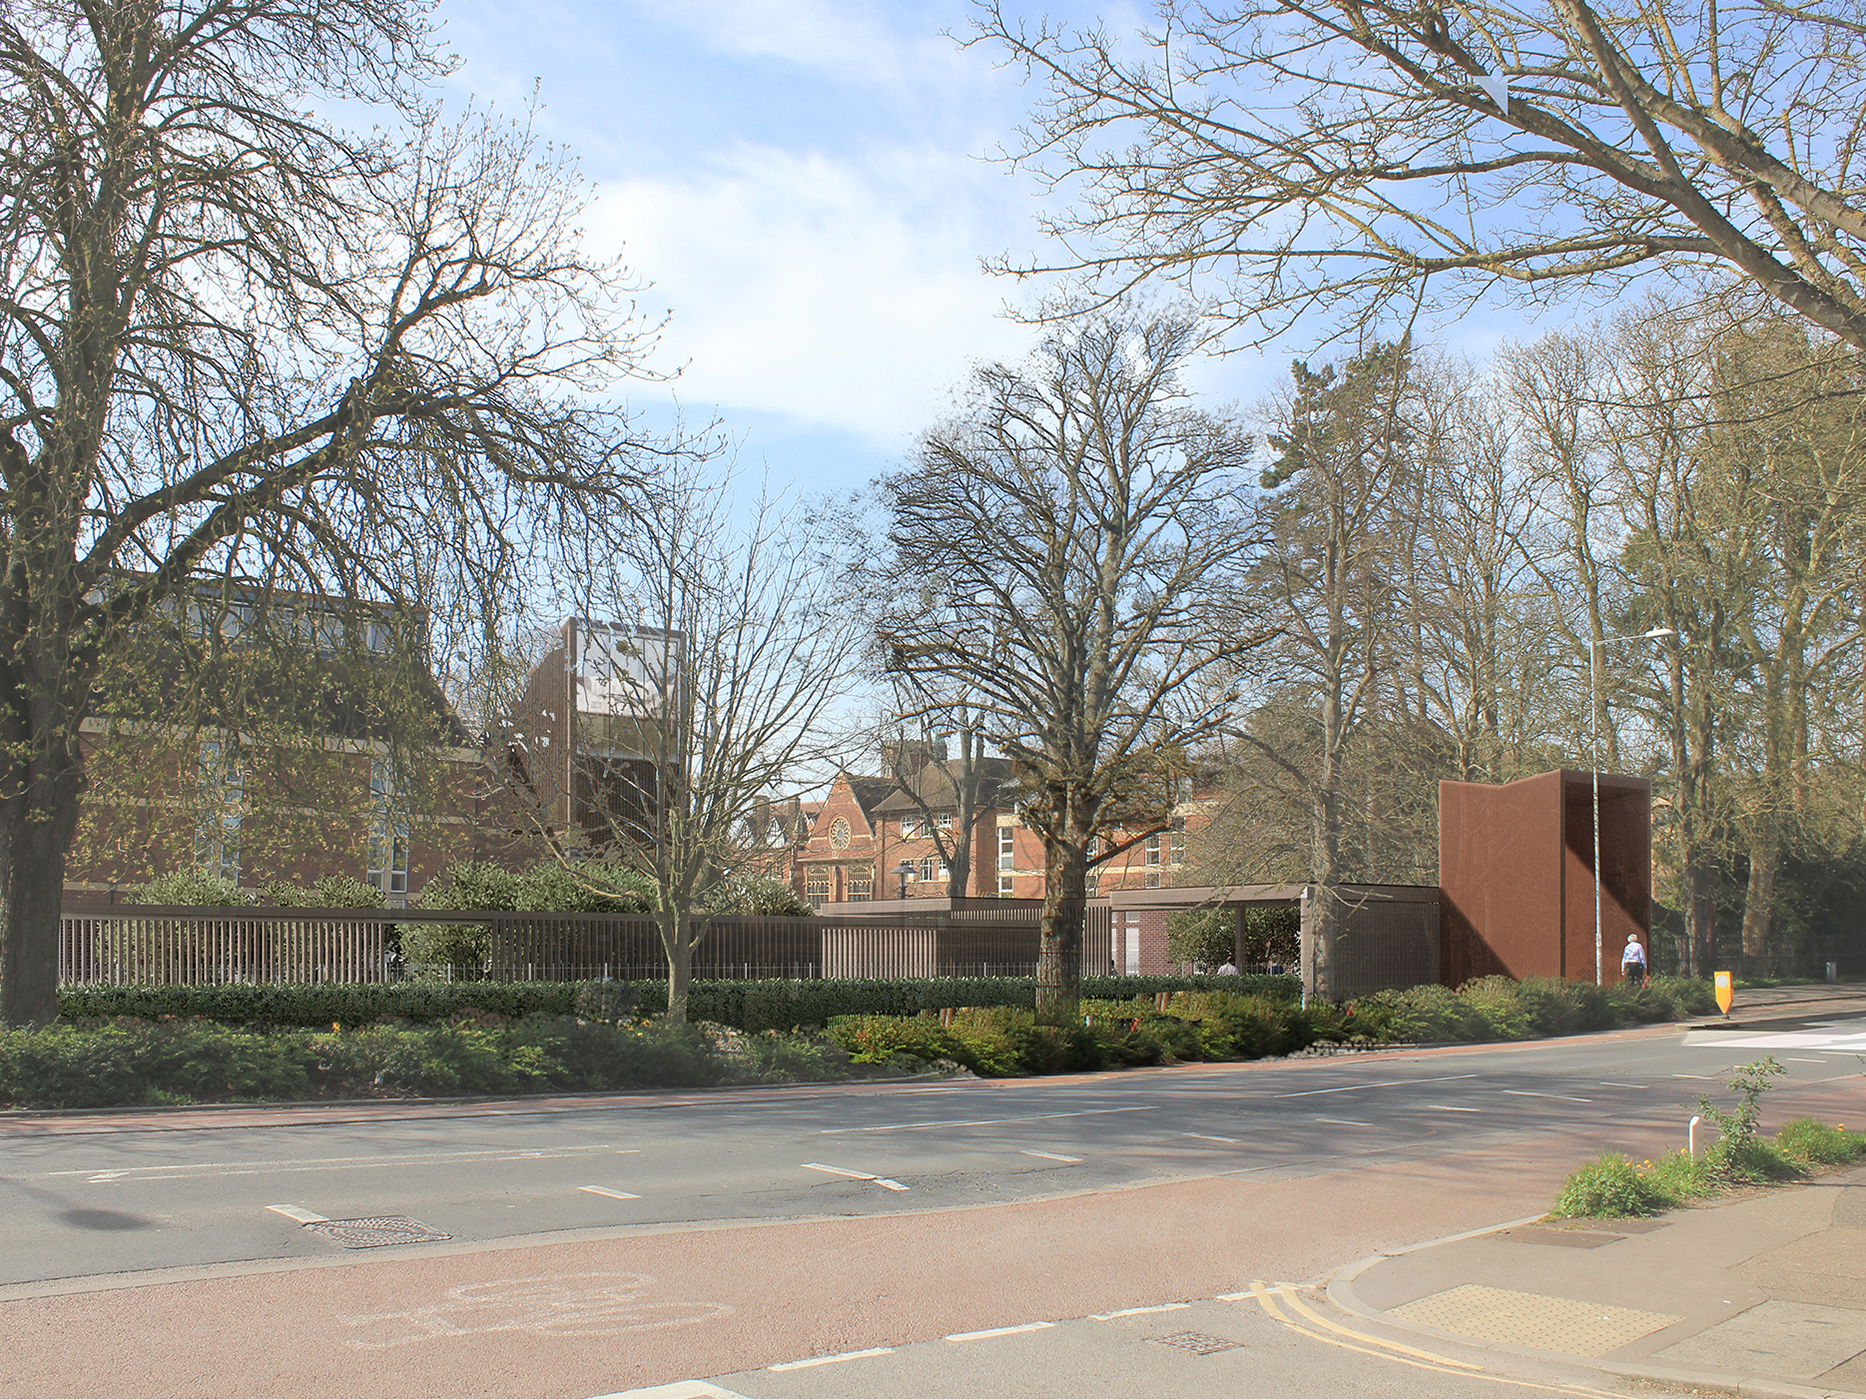 Visualisation showing view across hills road towards gateway entrance and porters' lodge in distance with landscaped pavement and trees in foreground  | cdc studio cambridge architects